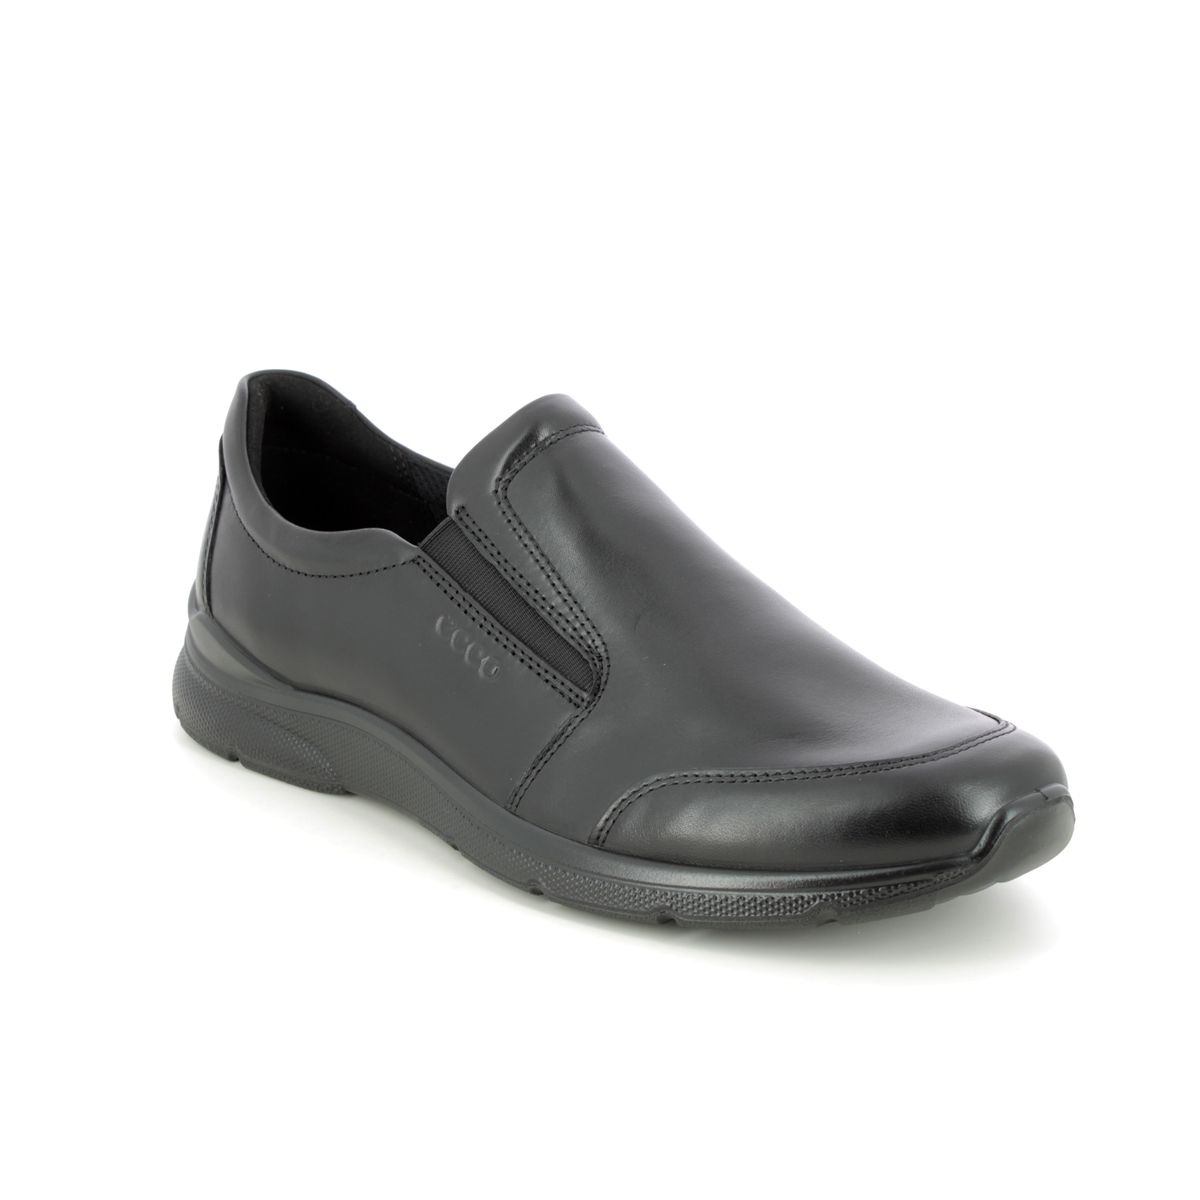 Ecco Irving Slip-On Black Leather Mens Slip-On Shoes 511684-11001 In Size 44 In Plain Black Leather